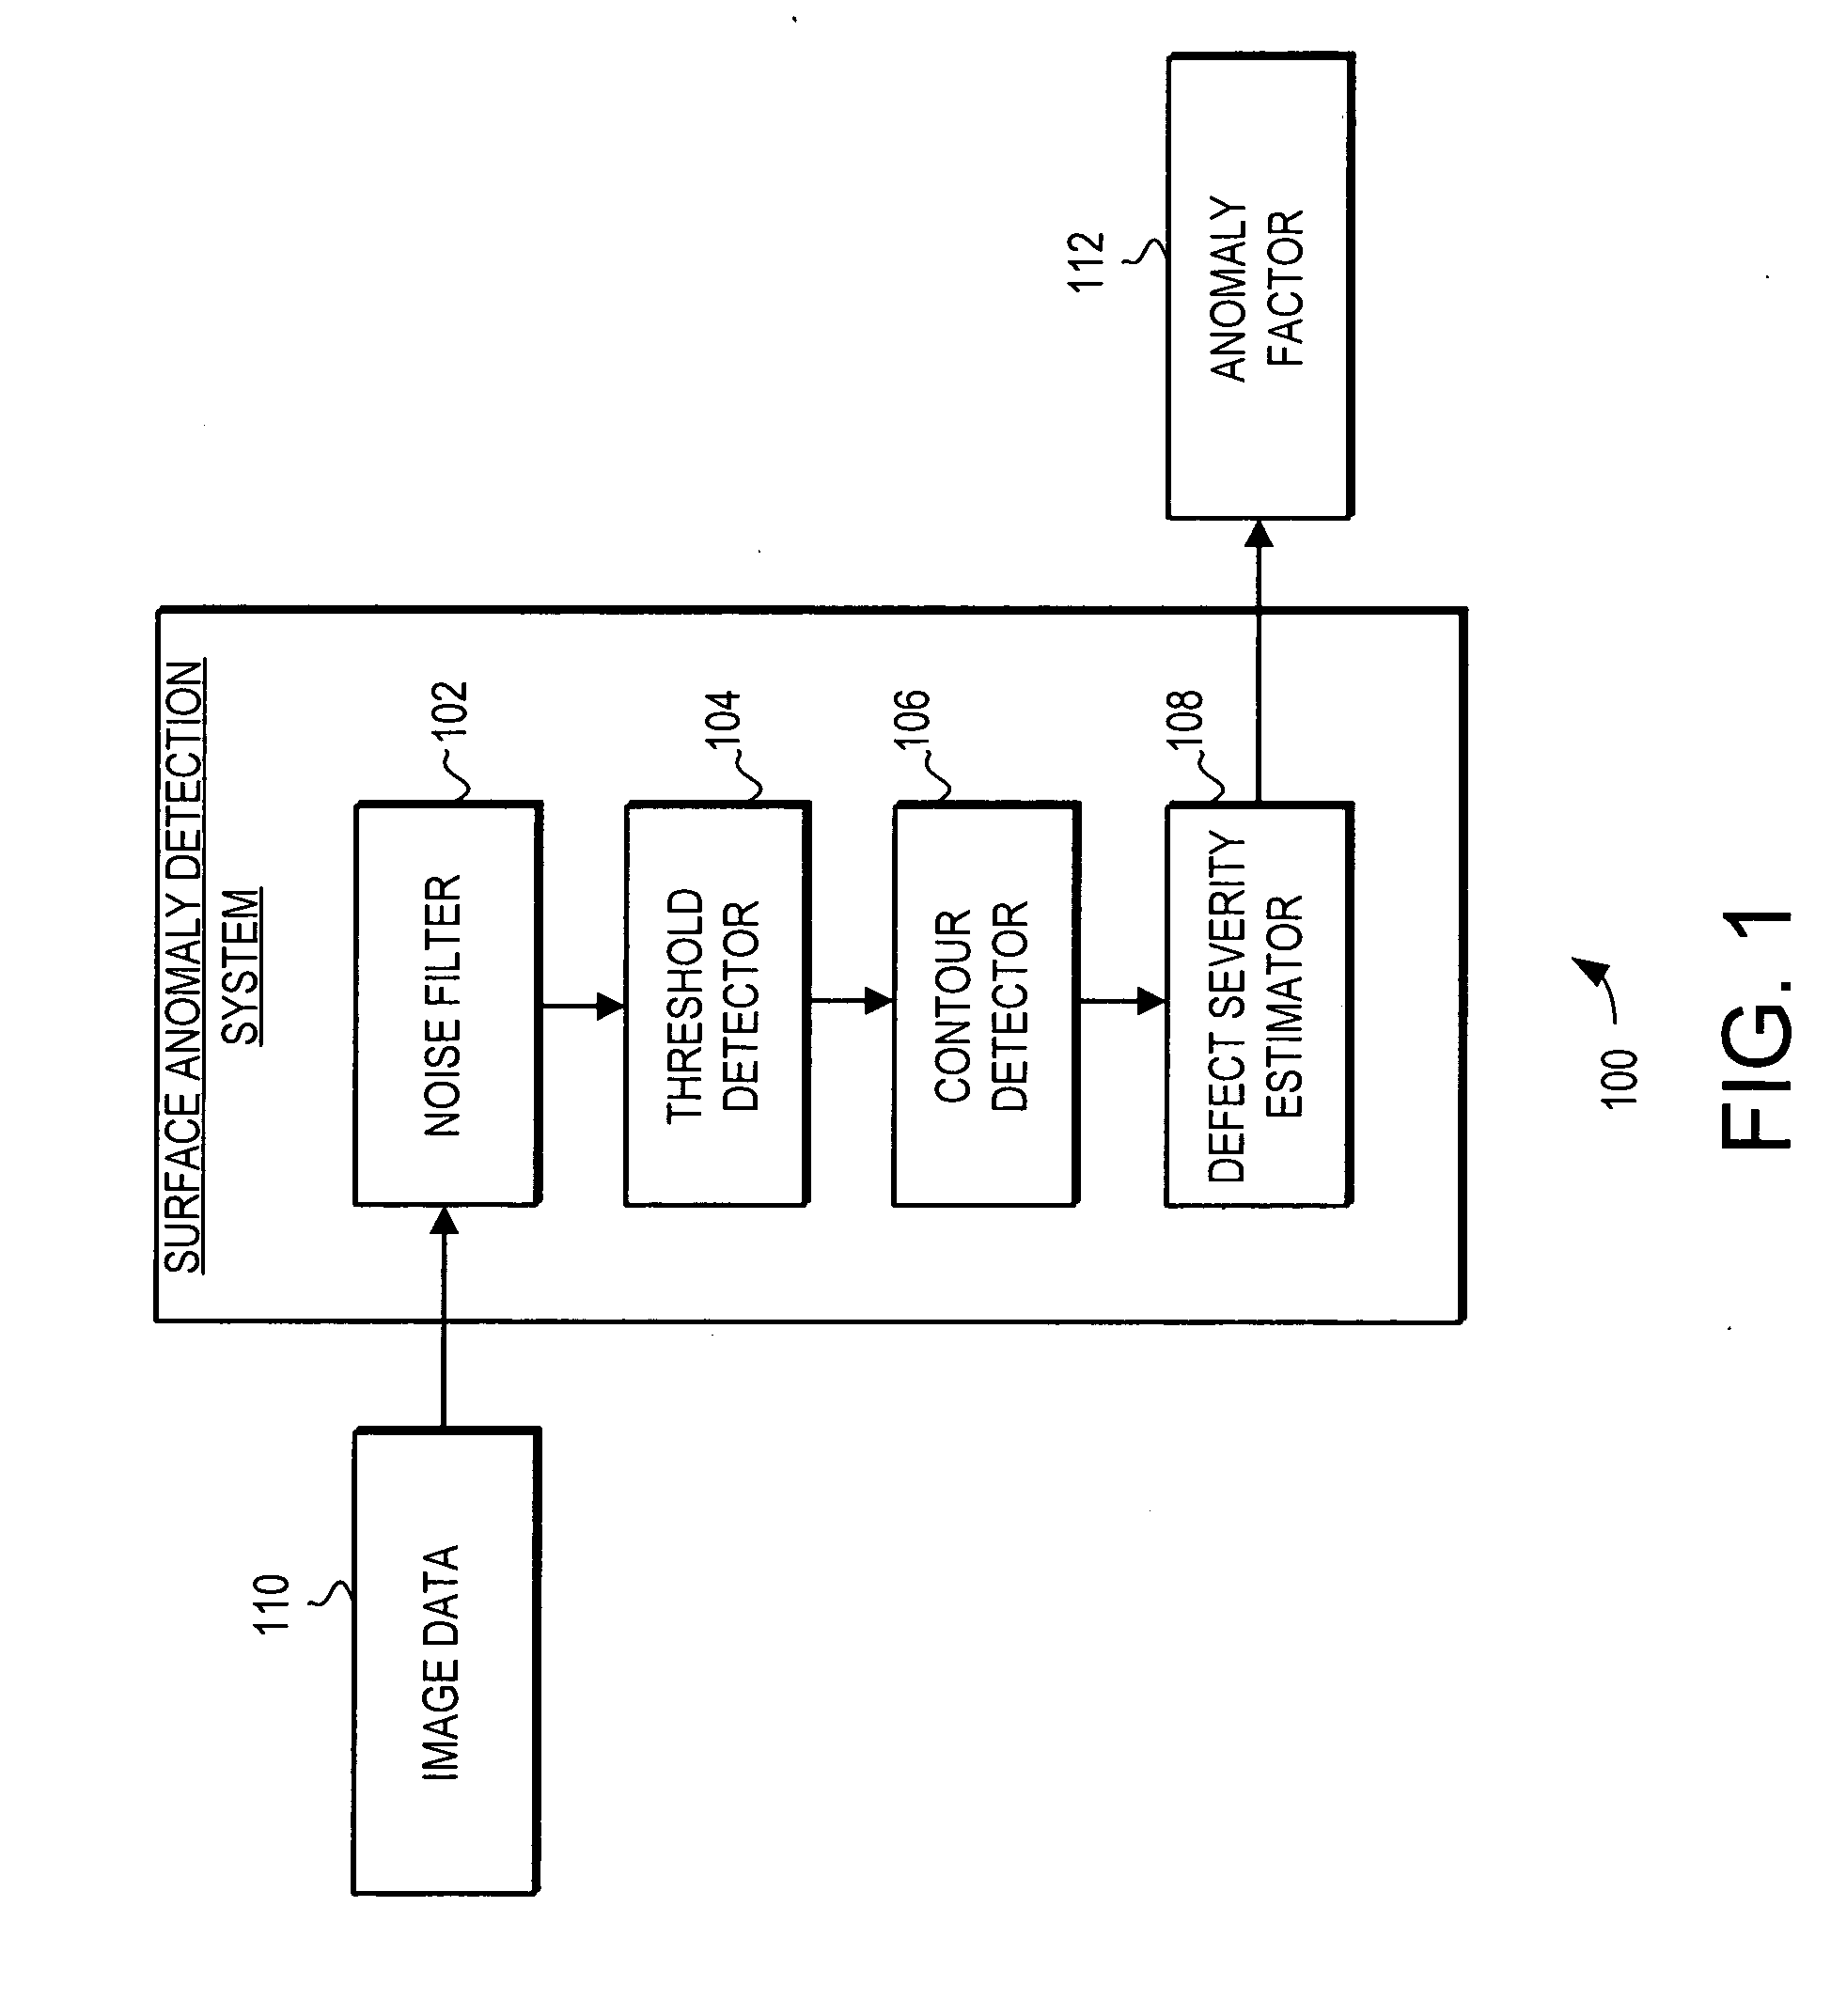 Surface anomaly detection system and method